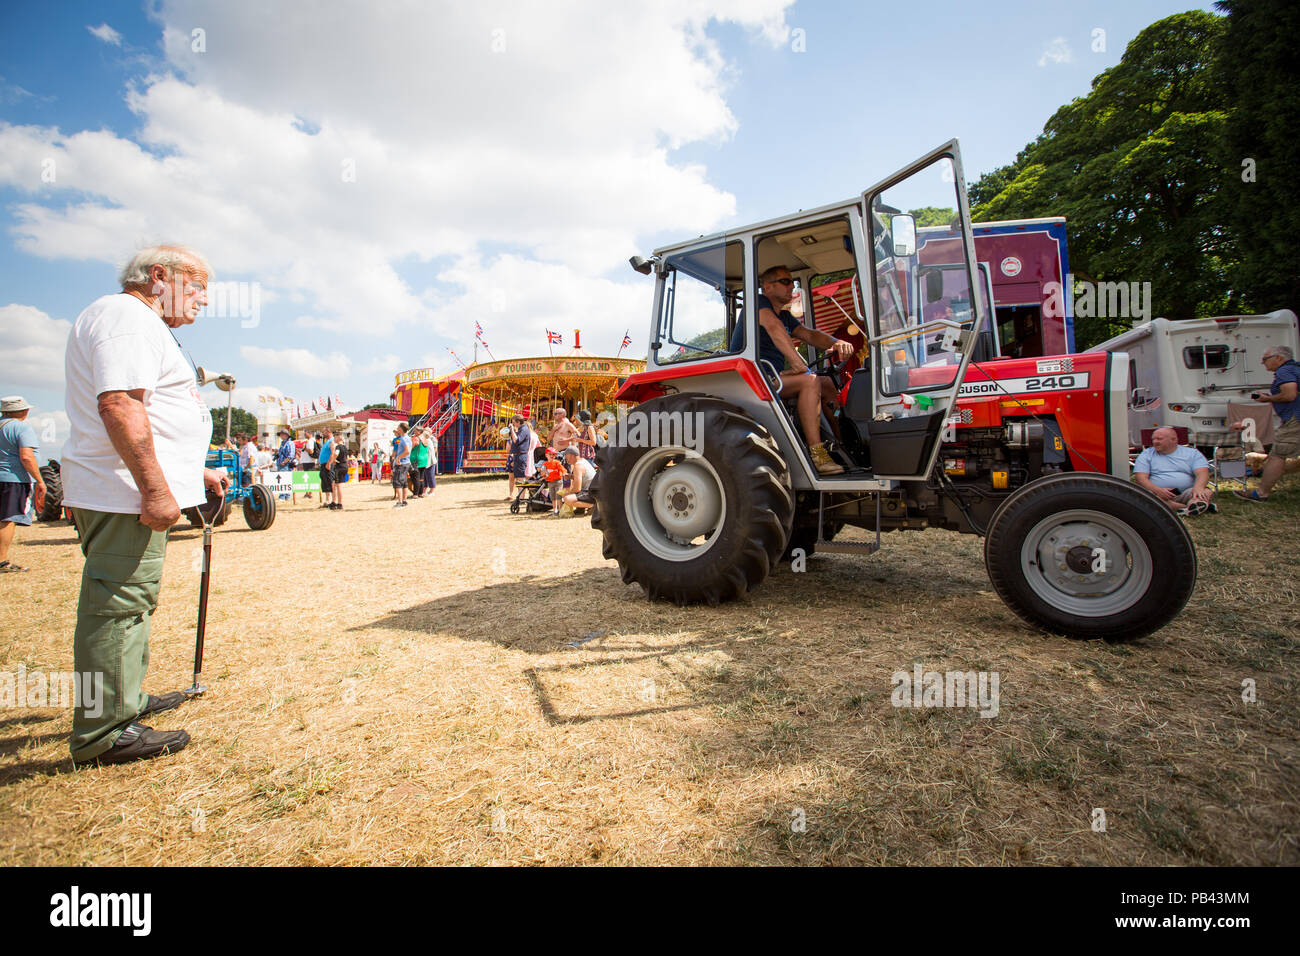 Tractor display at the 2018 Cheshire Steam Fair Stock Photo